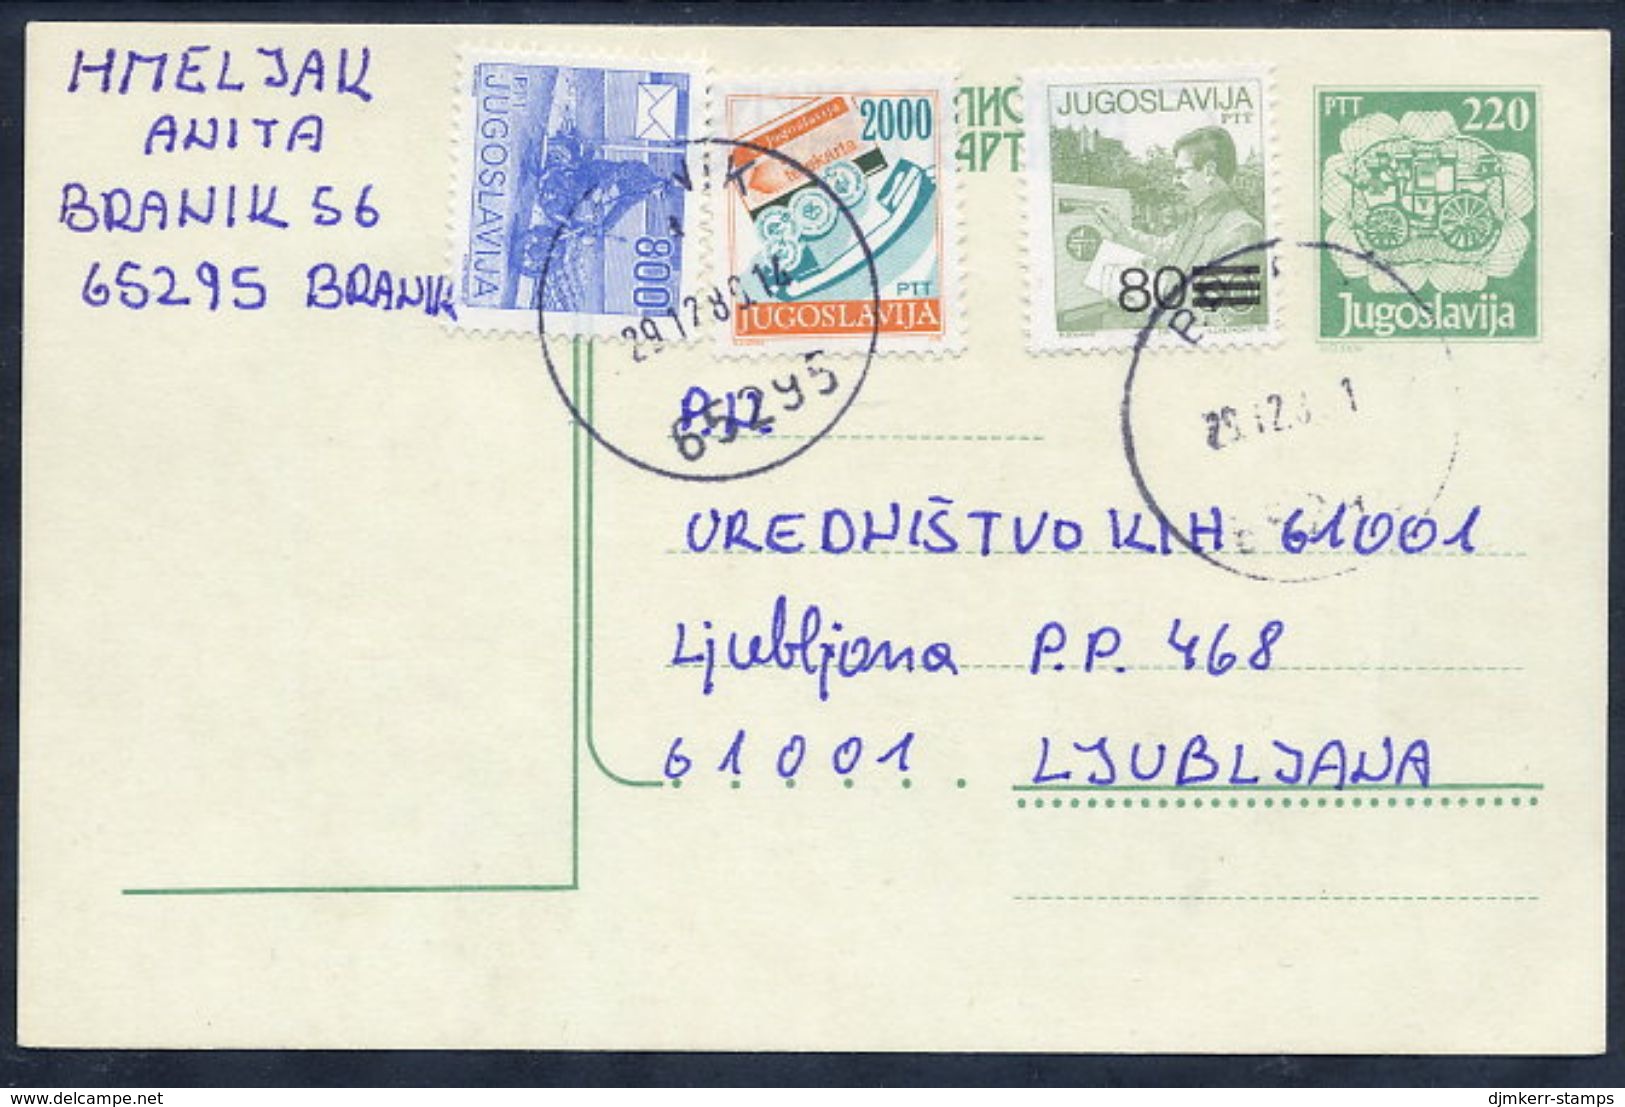 YUGOSLAVIA 1989 Mailcoach 220 D. Stationery Card Used With Additional Franking.  Michel P199 - Entiers Postaux